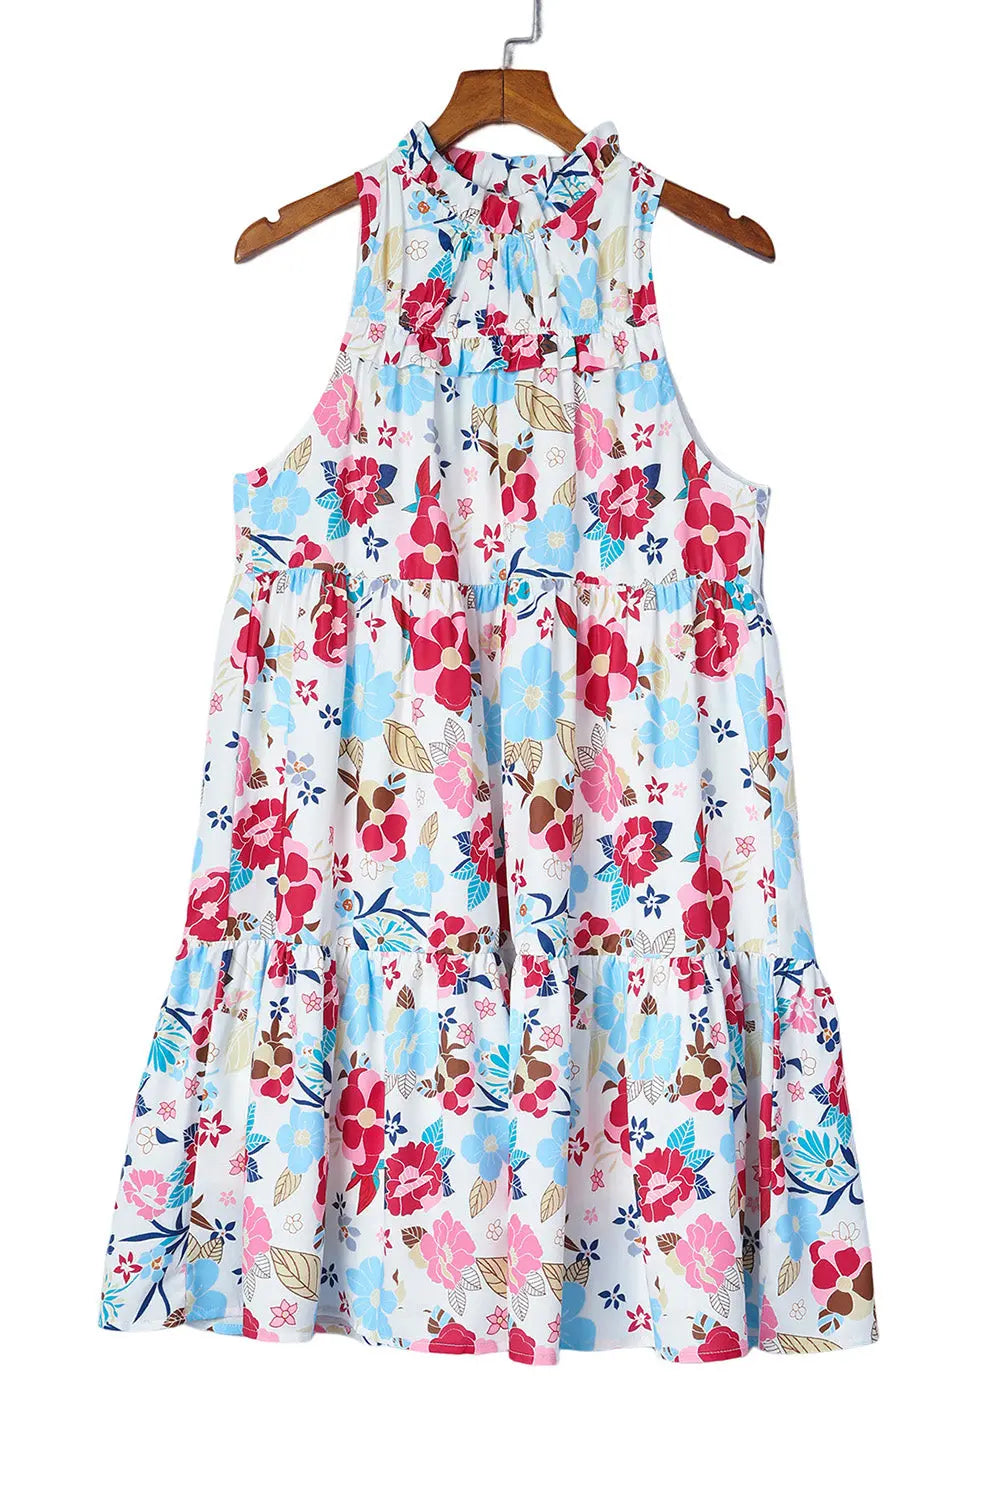 Blue Zone Planet |  White Frill Mock Neck Sleeveless Tiered Floral Dress Blue Zone Planet